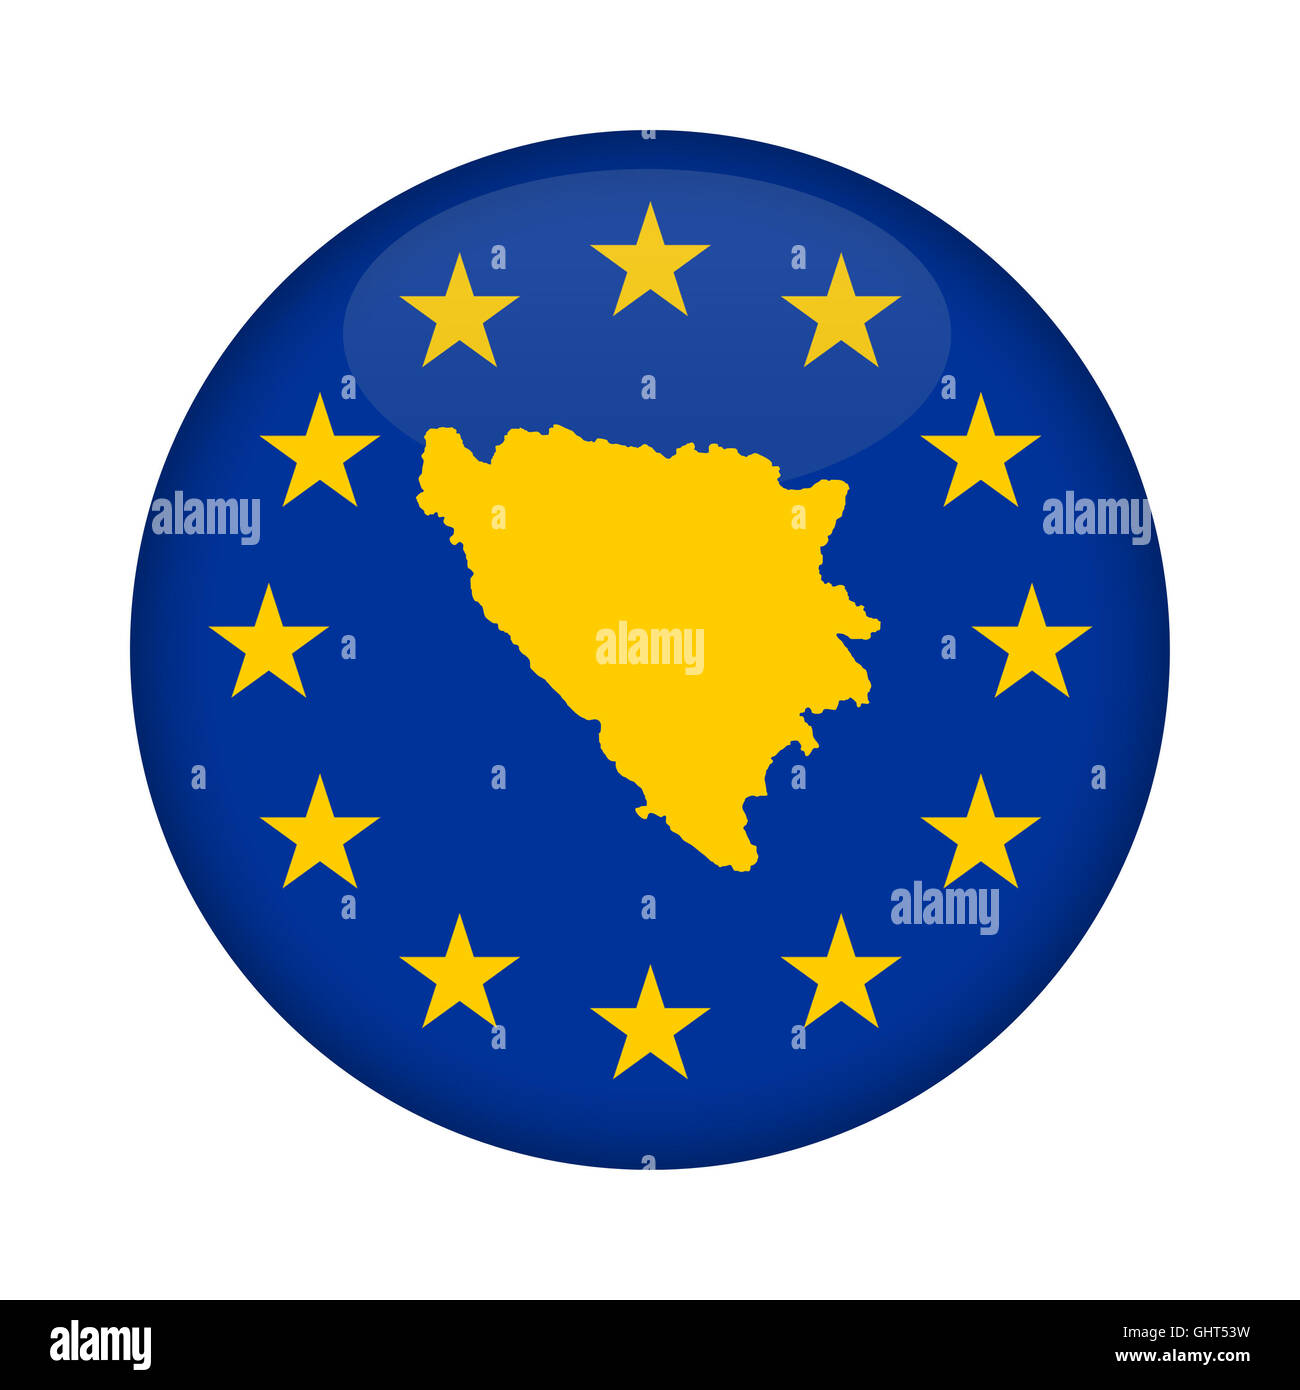 Bosnia and Herzegovina map on a European Union flag button isolated on a white background. Stock Photo